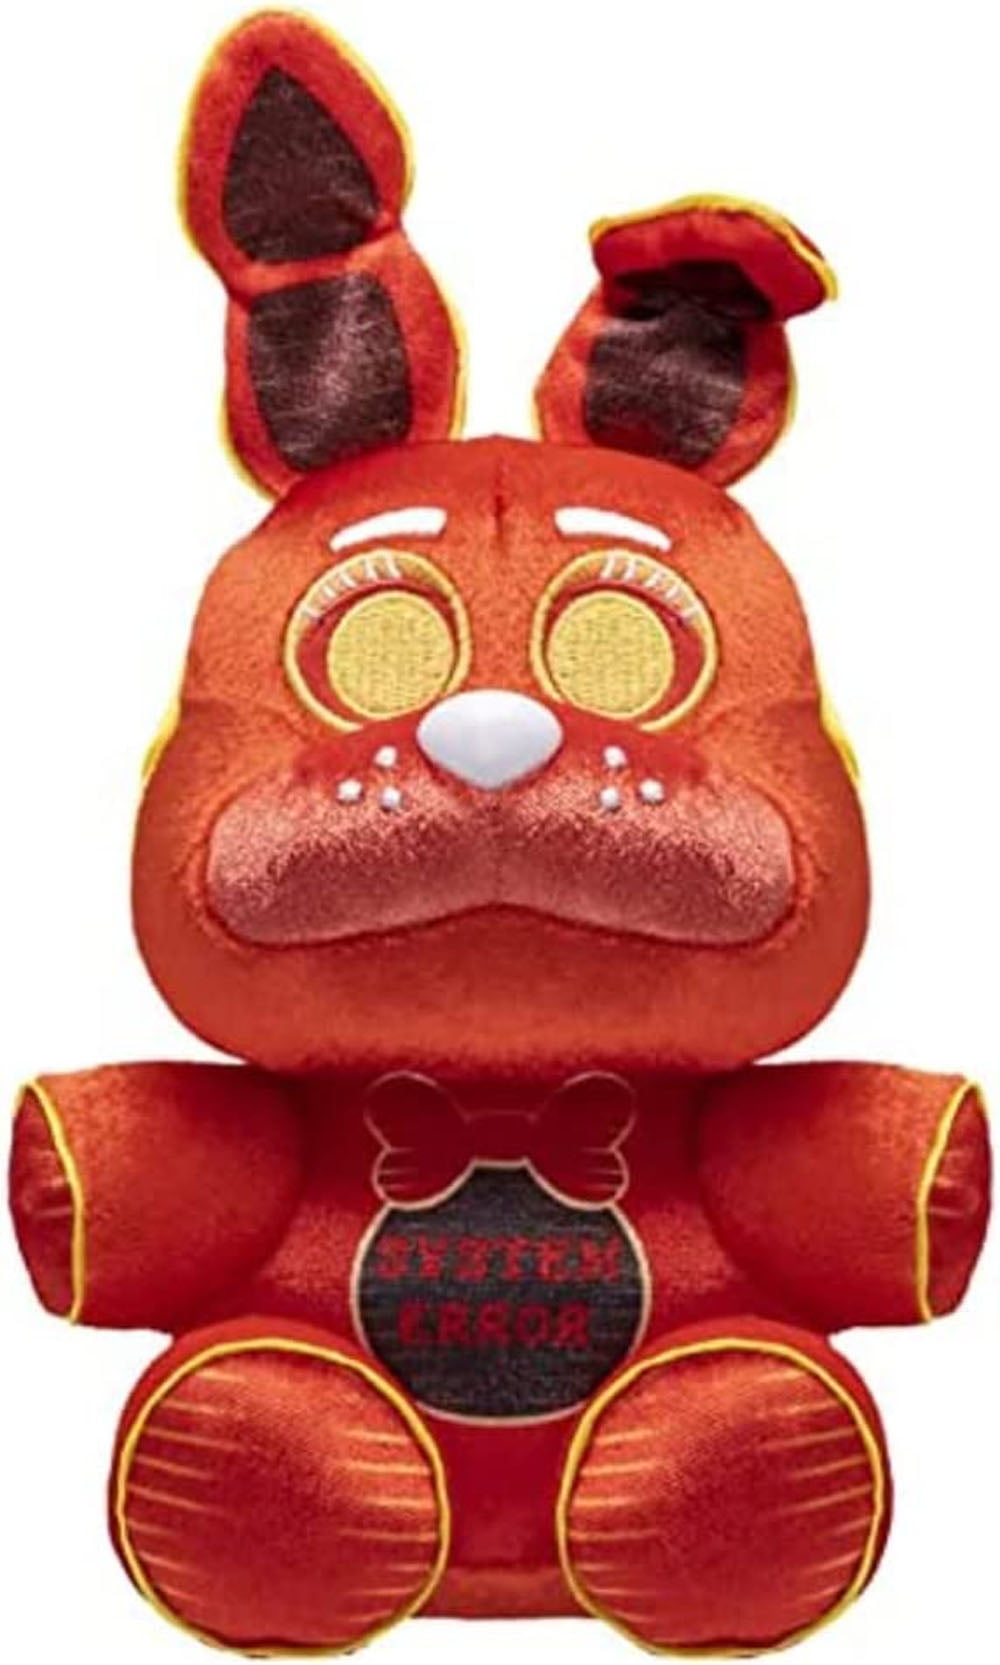  Nightmare Foxy Plush Toy, FNAF plushies Toy, FNAF All Character Stuffed  Animal Doll Children's Gift Collection,8” : Toys & Games